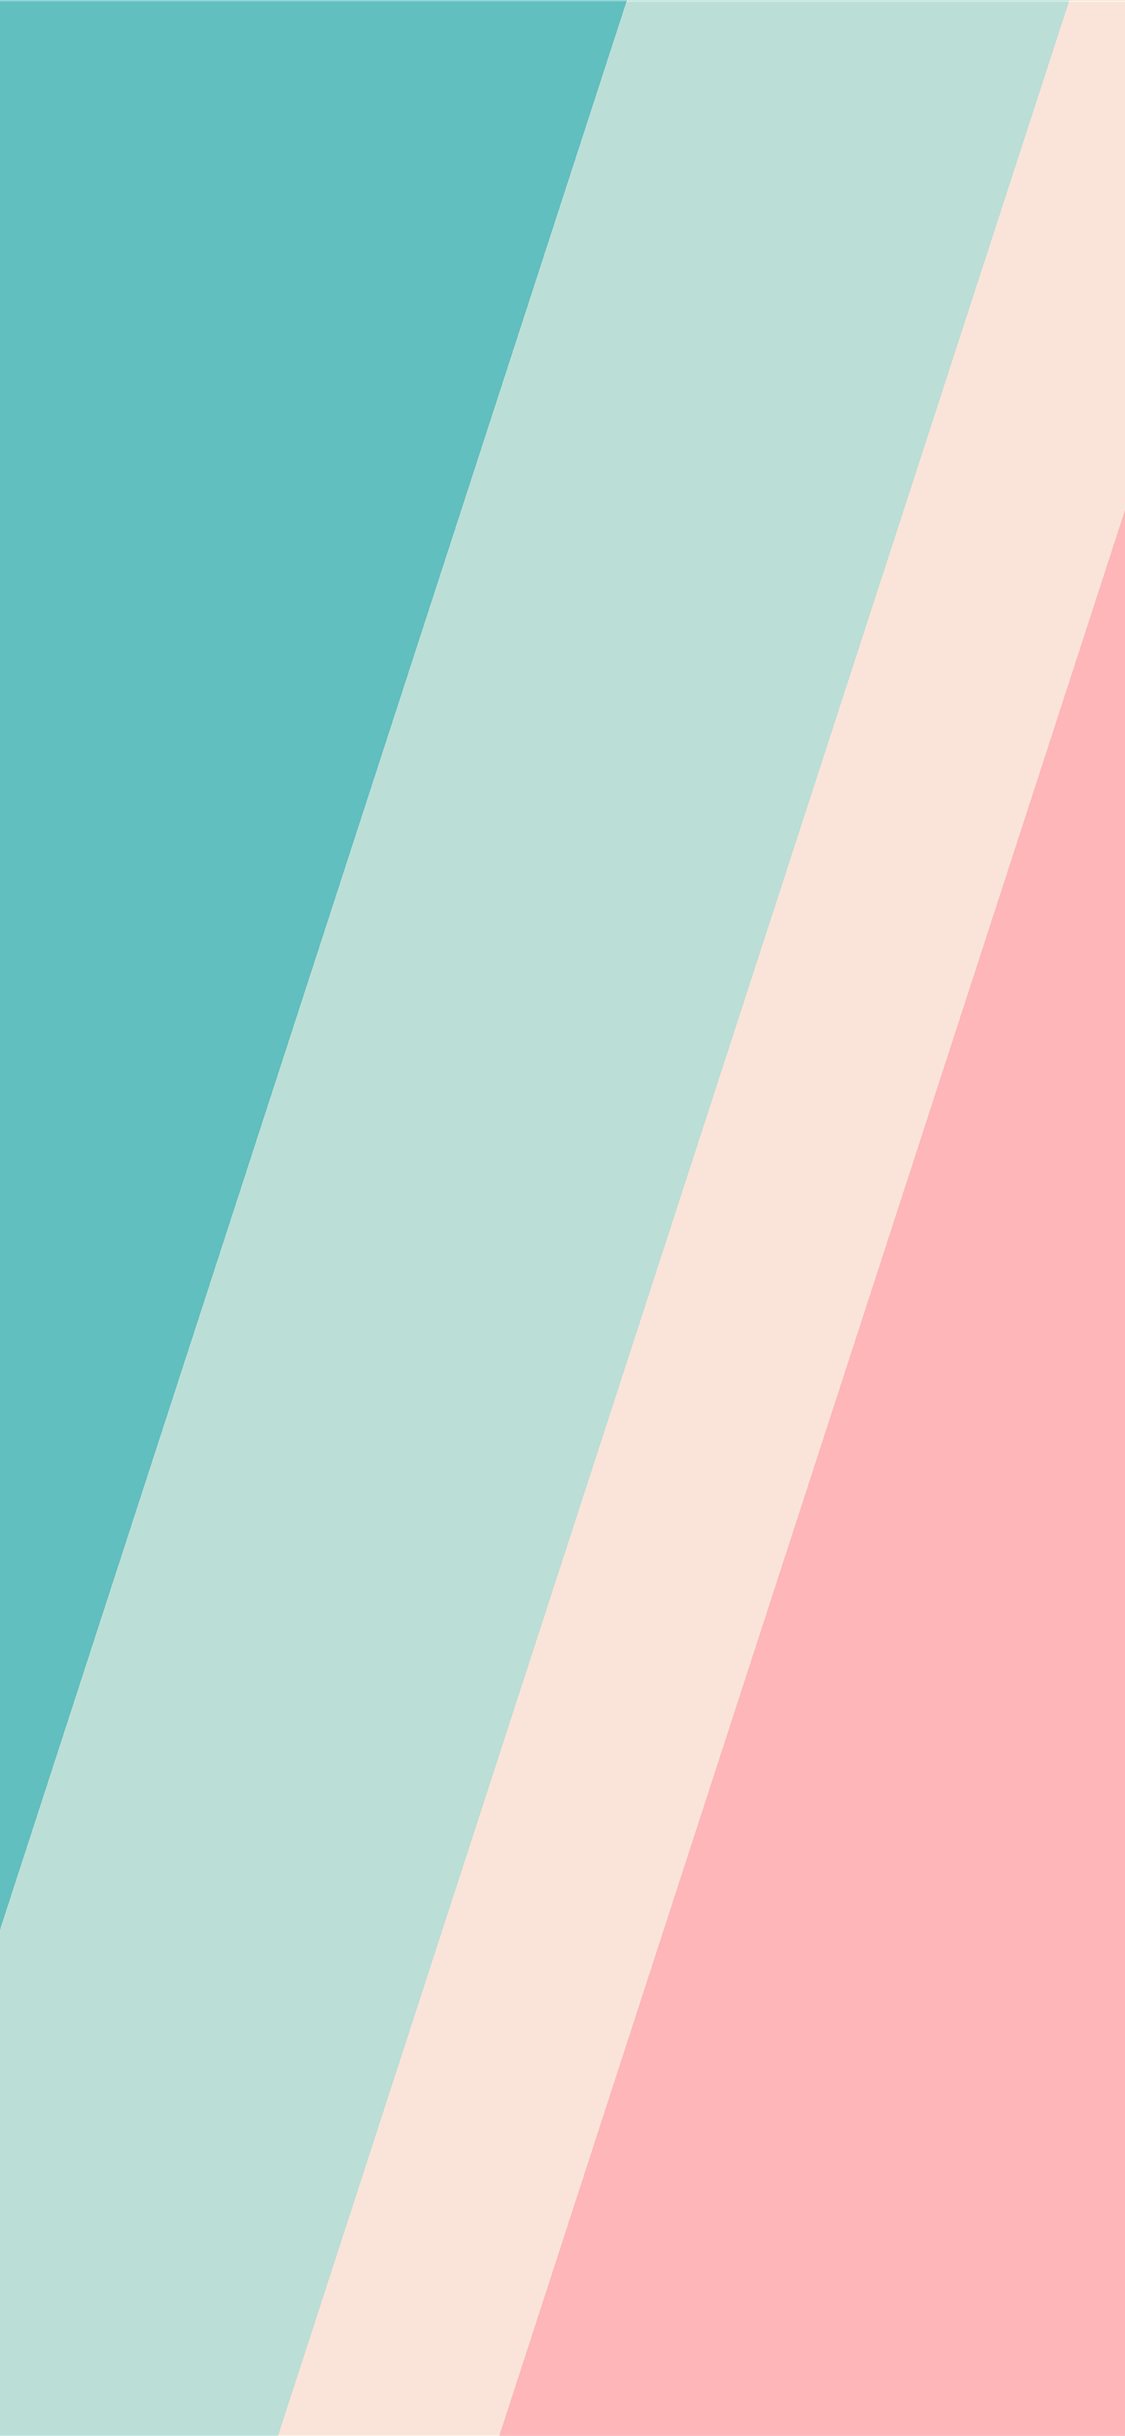 Pink and teal striped textile iphone x wallpapers free download